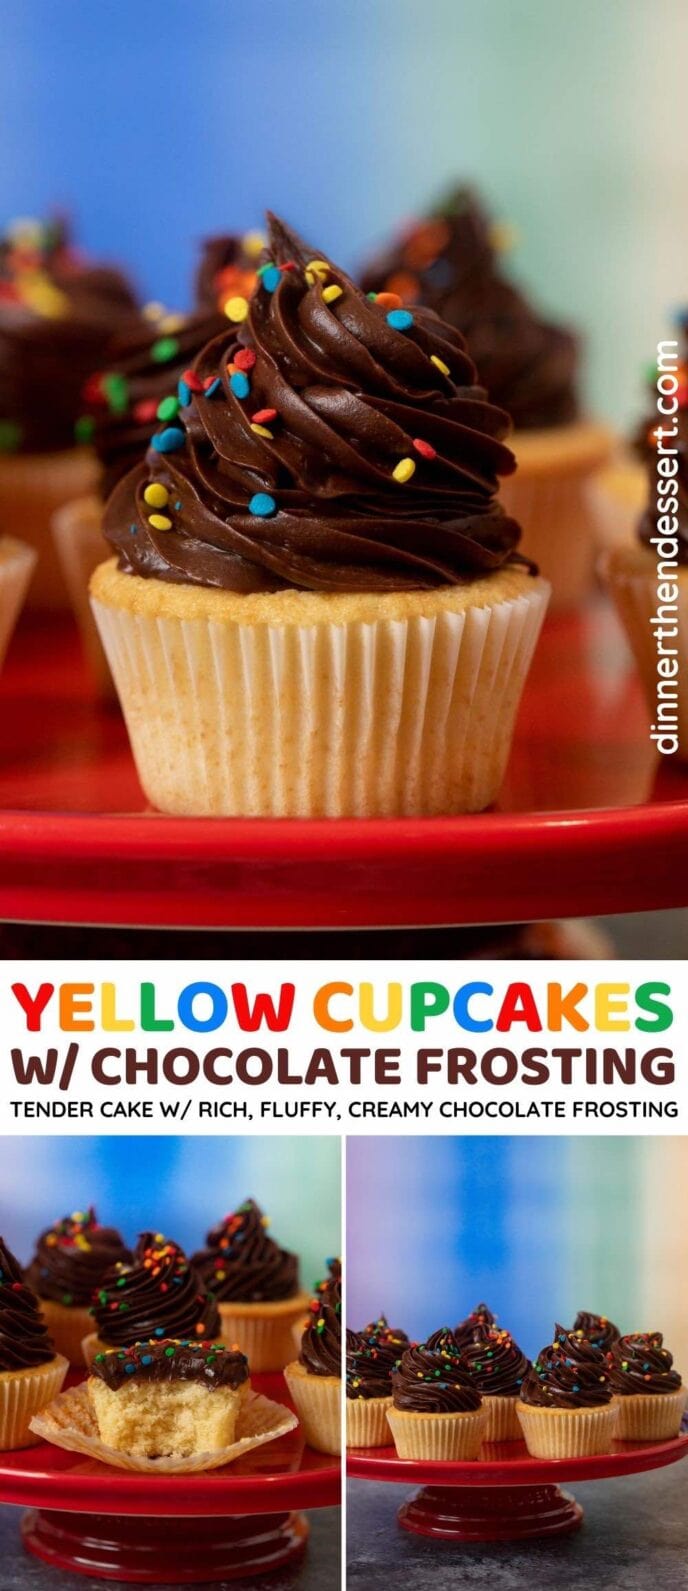 Yellow Cupcakes w/ Chocolate Frosting collage